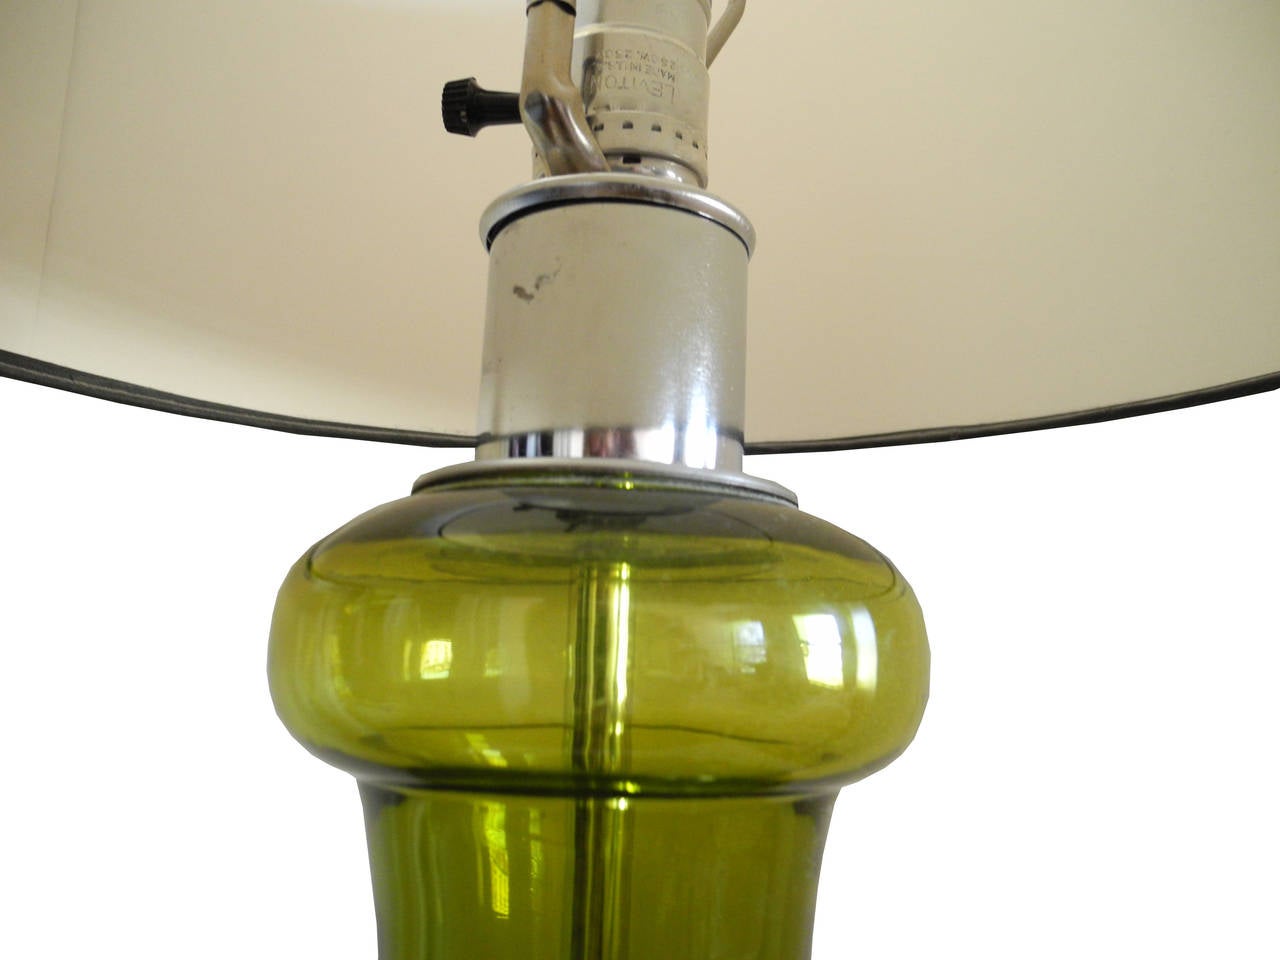 American Mid-Century Modern 1970's Green Glass and Chrome Mod Lamp For Sale